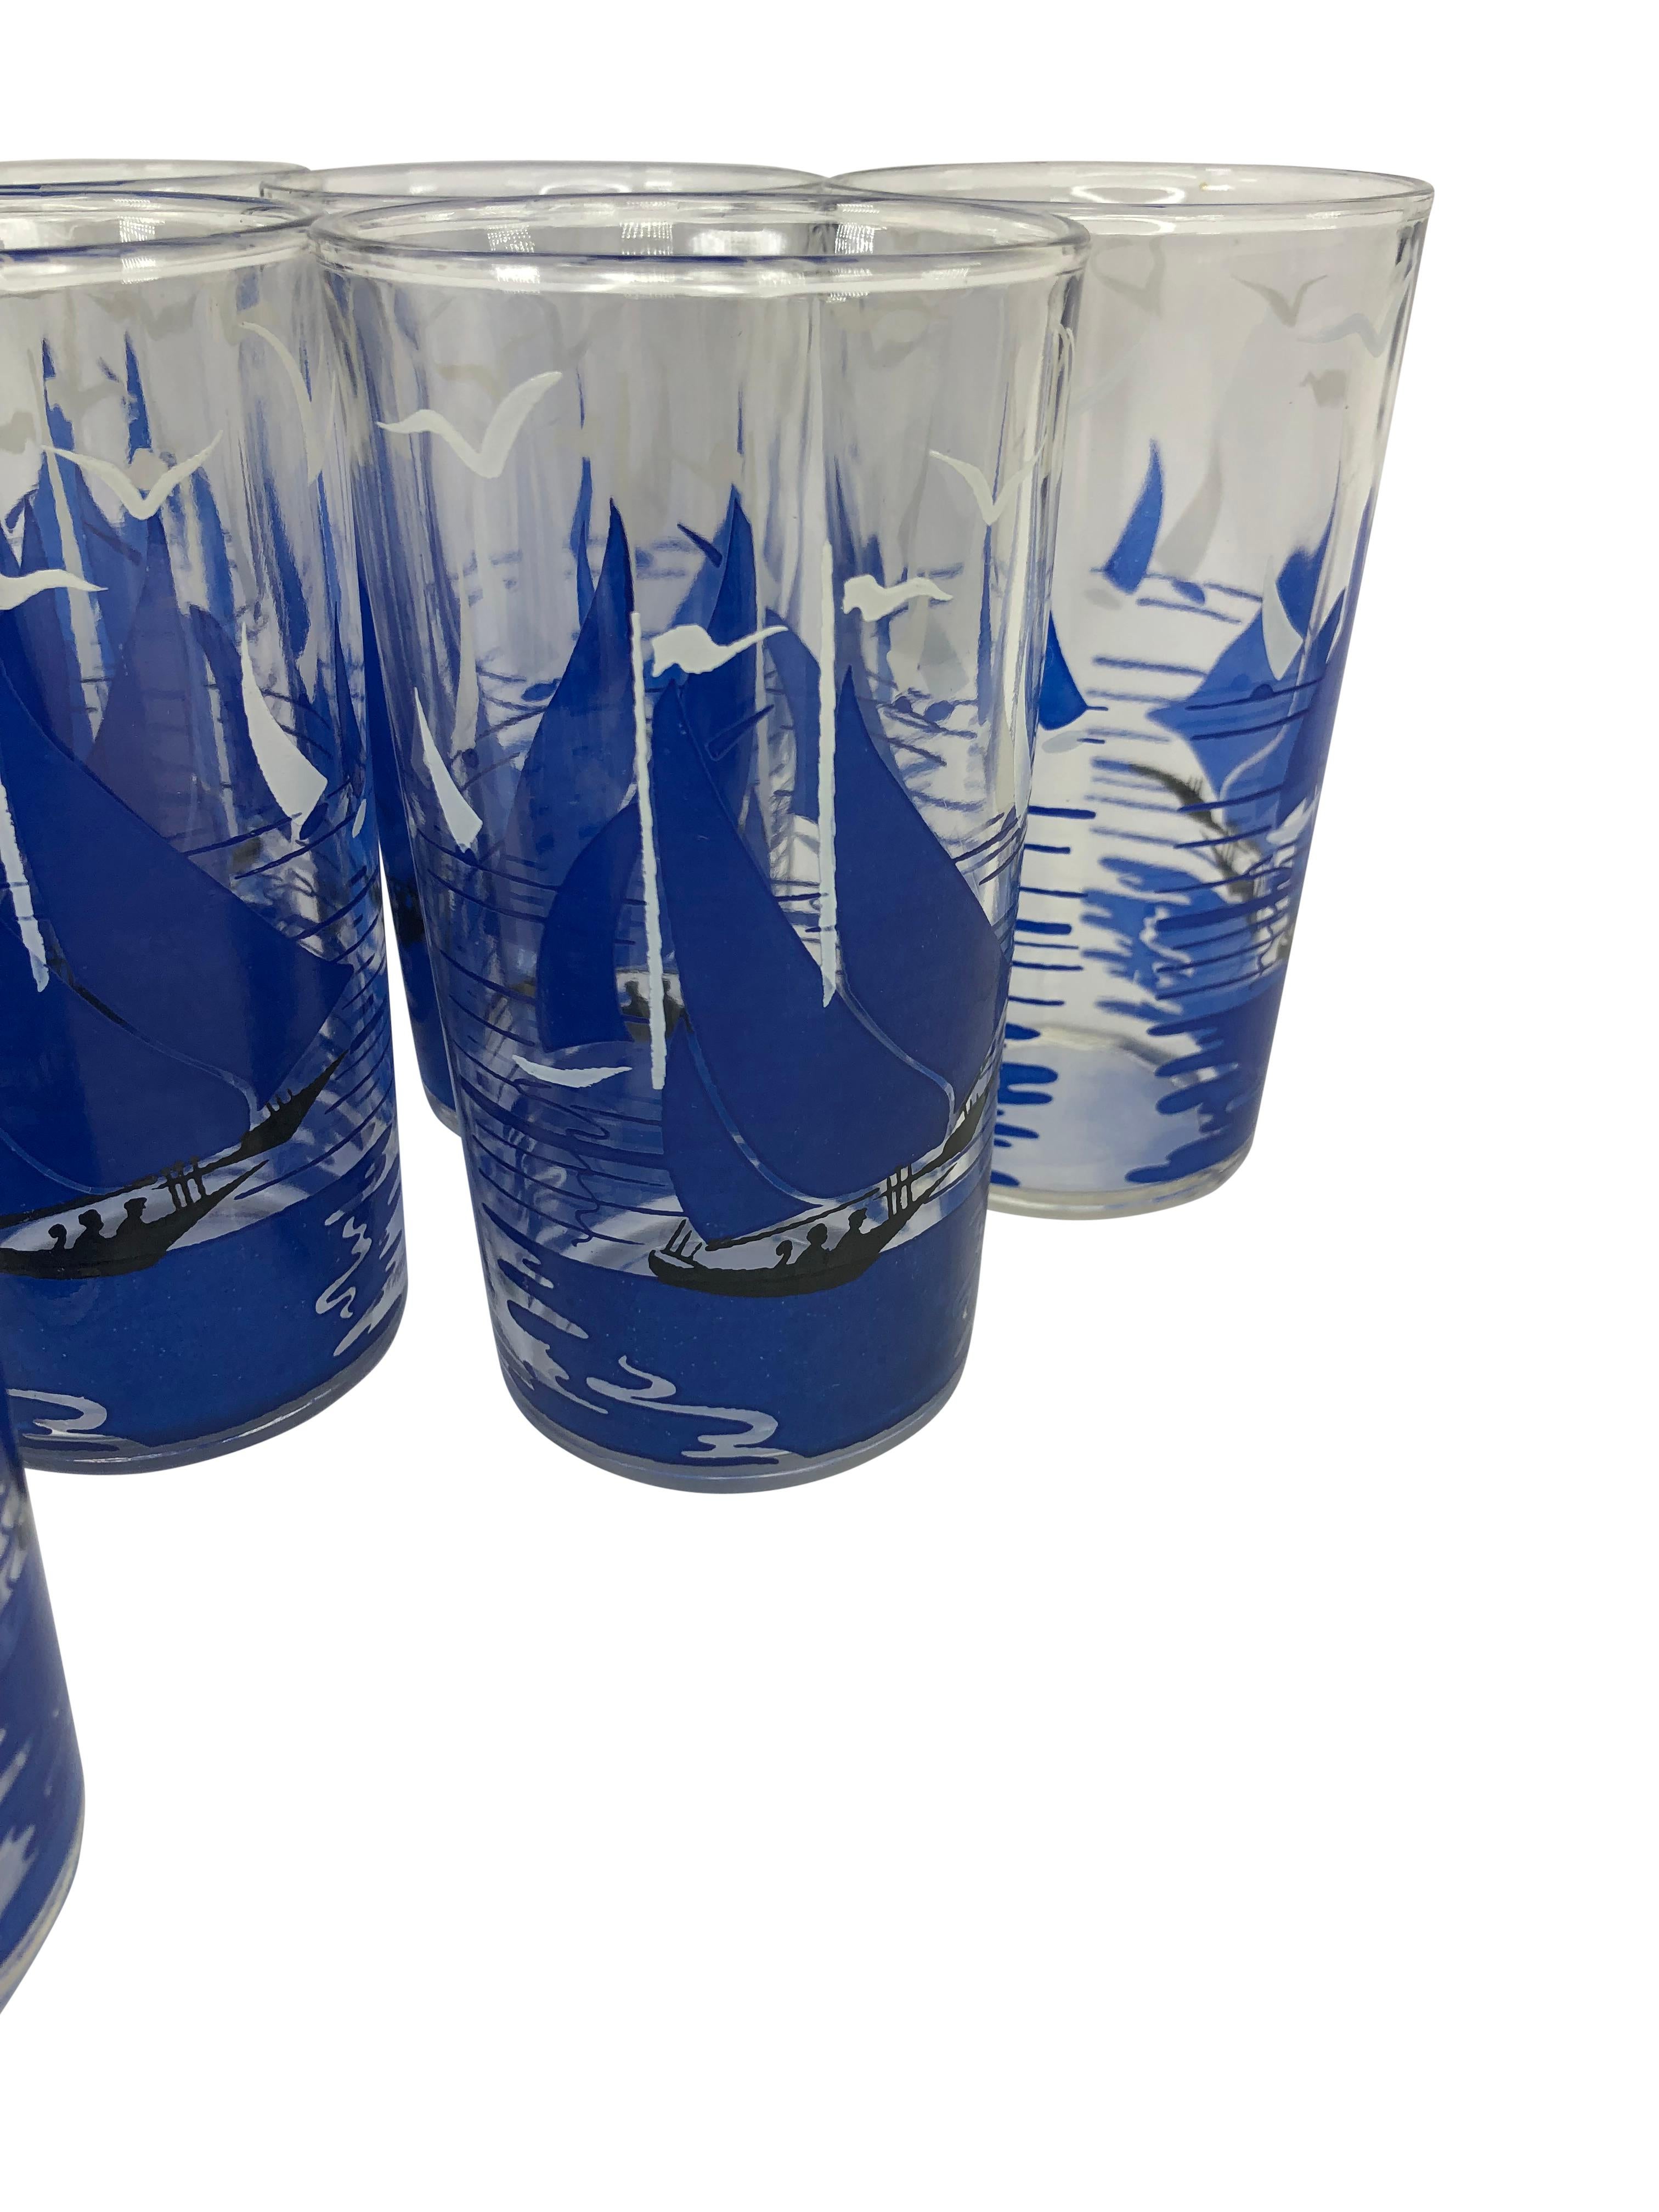 Set of 8 Vintage Mid Century Tumblers With Sailboats in Boat-Shaped Caddy In Good Condition For Sale In Chapel Hill, NC